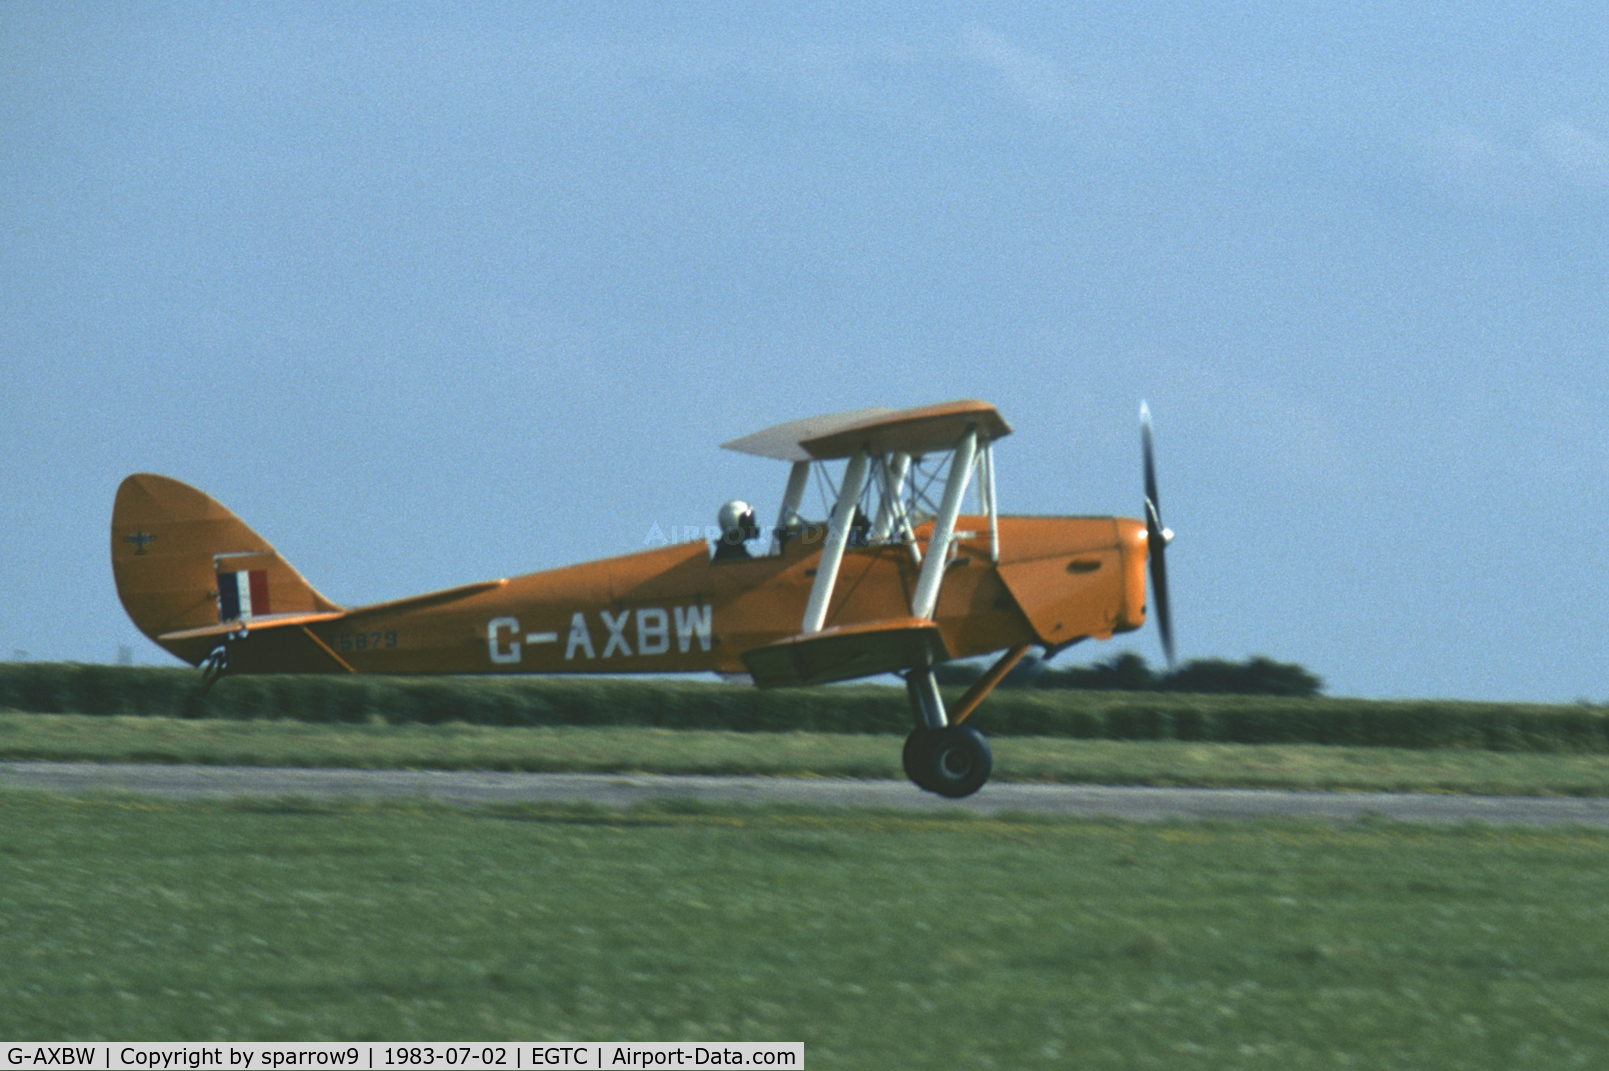 G-AXBW, 1940 De Havilland DH-82A Tiger Moth II C/N 83595, Taking-off, crashed 1 min later. PFA-Rally Cranfield. Scanned from a slide.